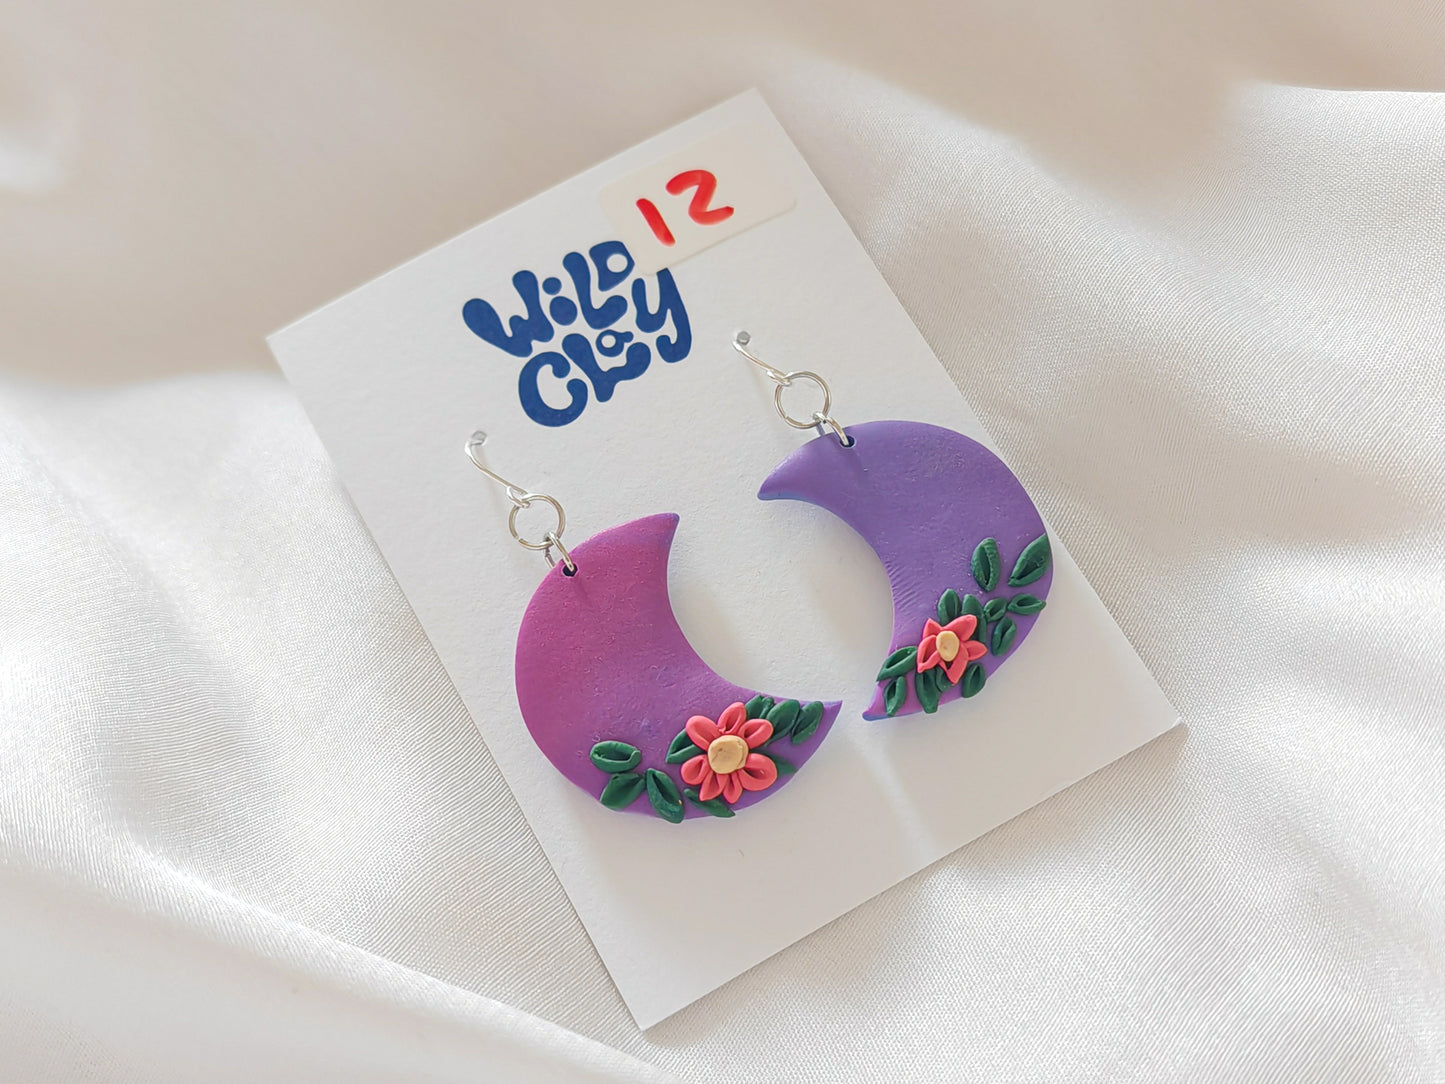 Purple moon earrings with floral detail